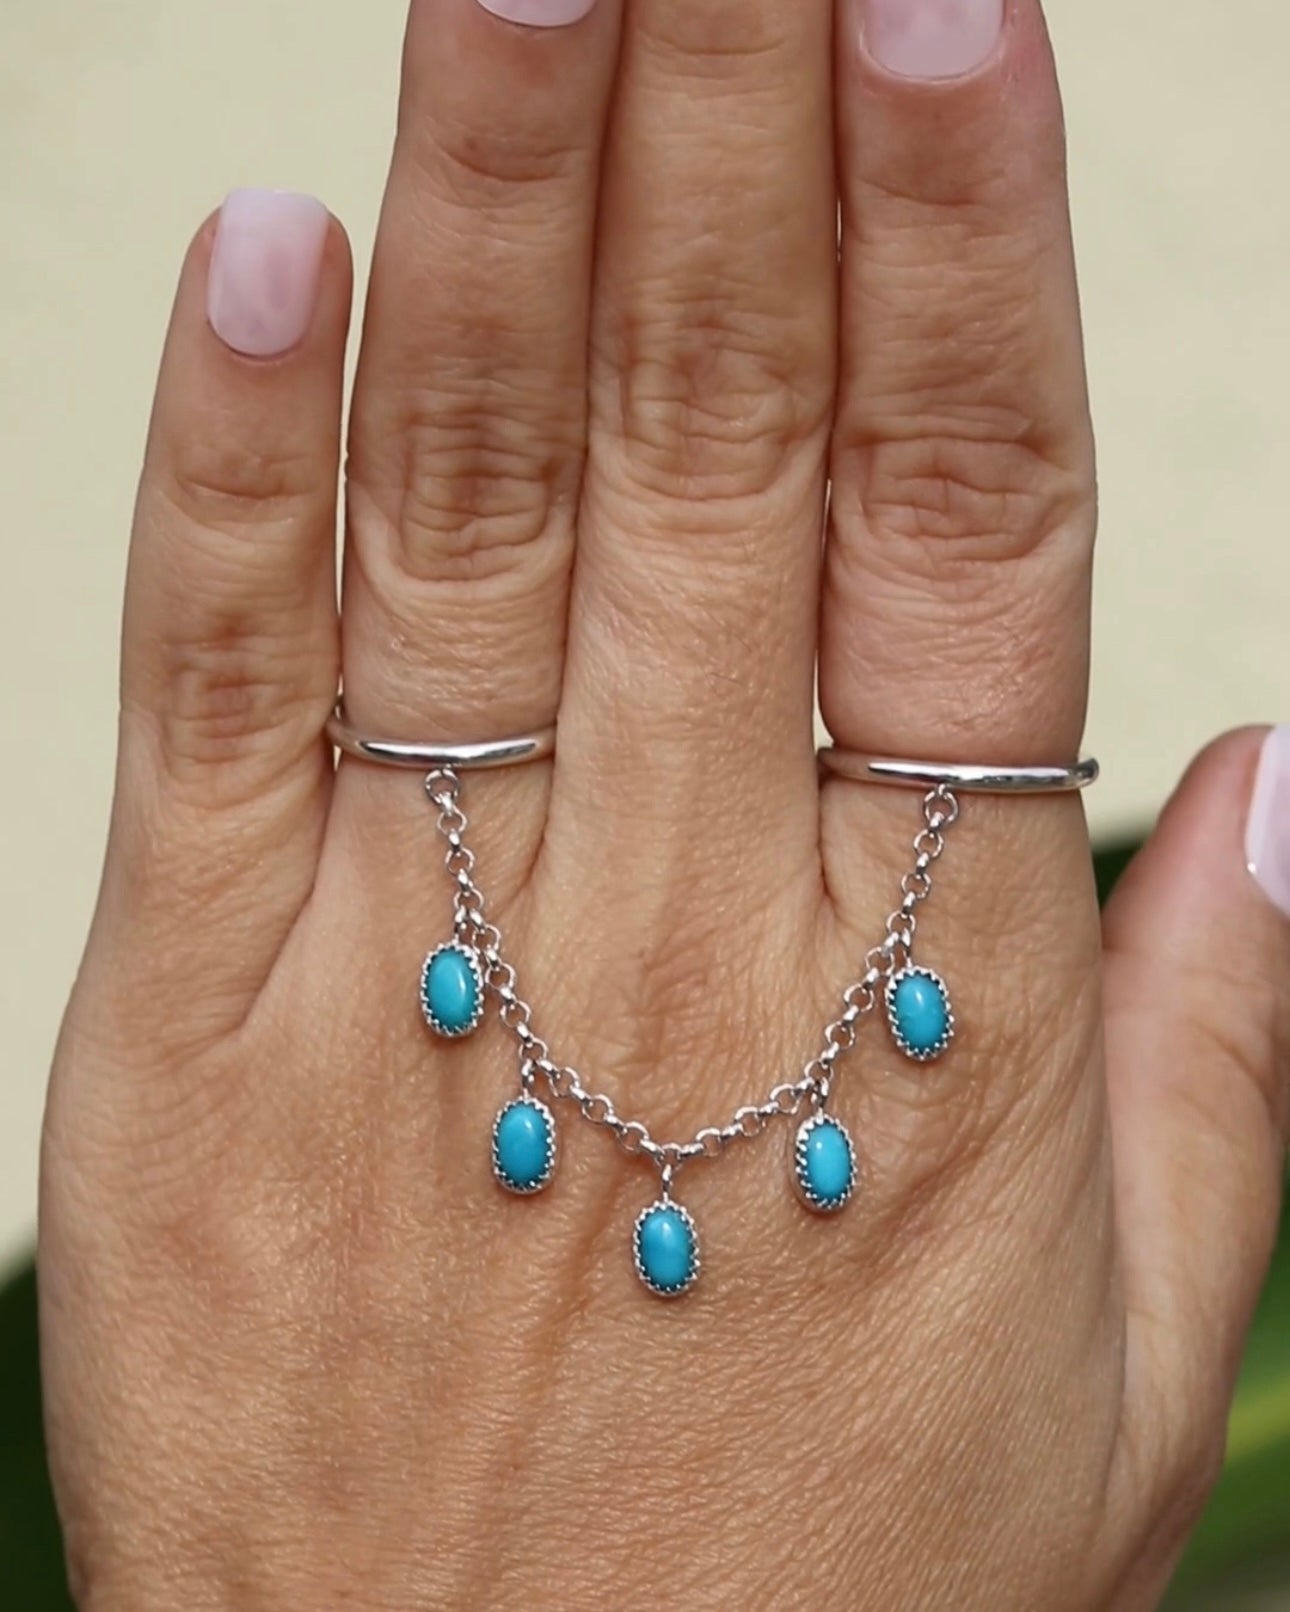 Turquoise Chain Ring. Size 4 and 6